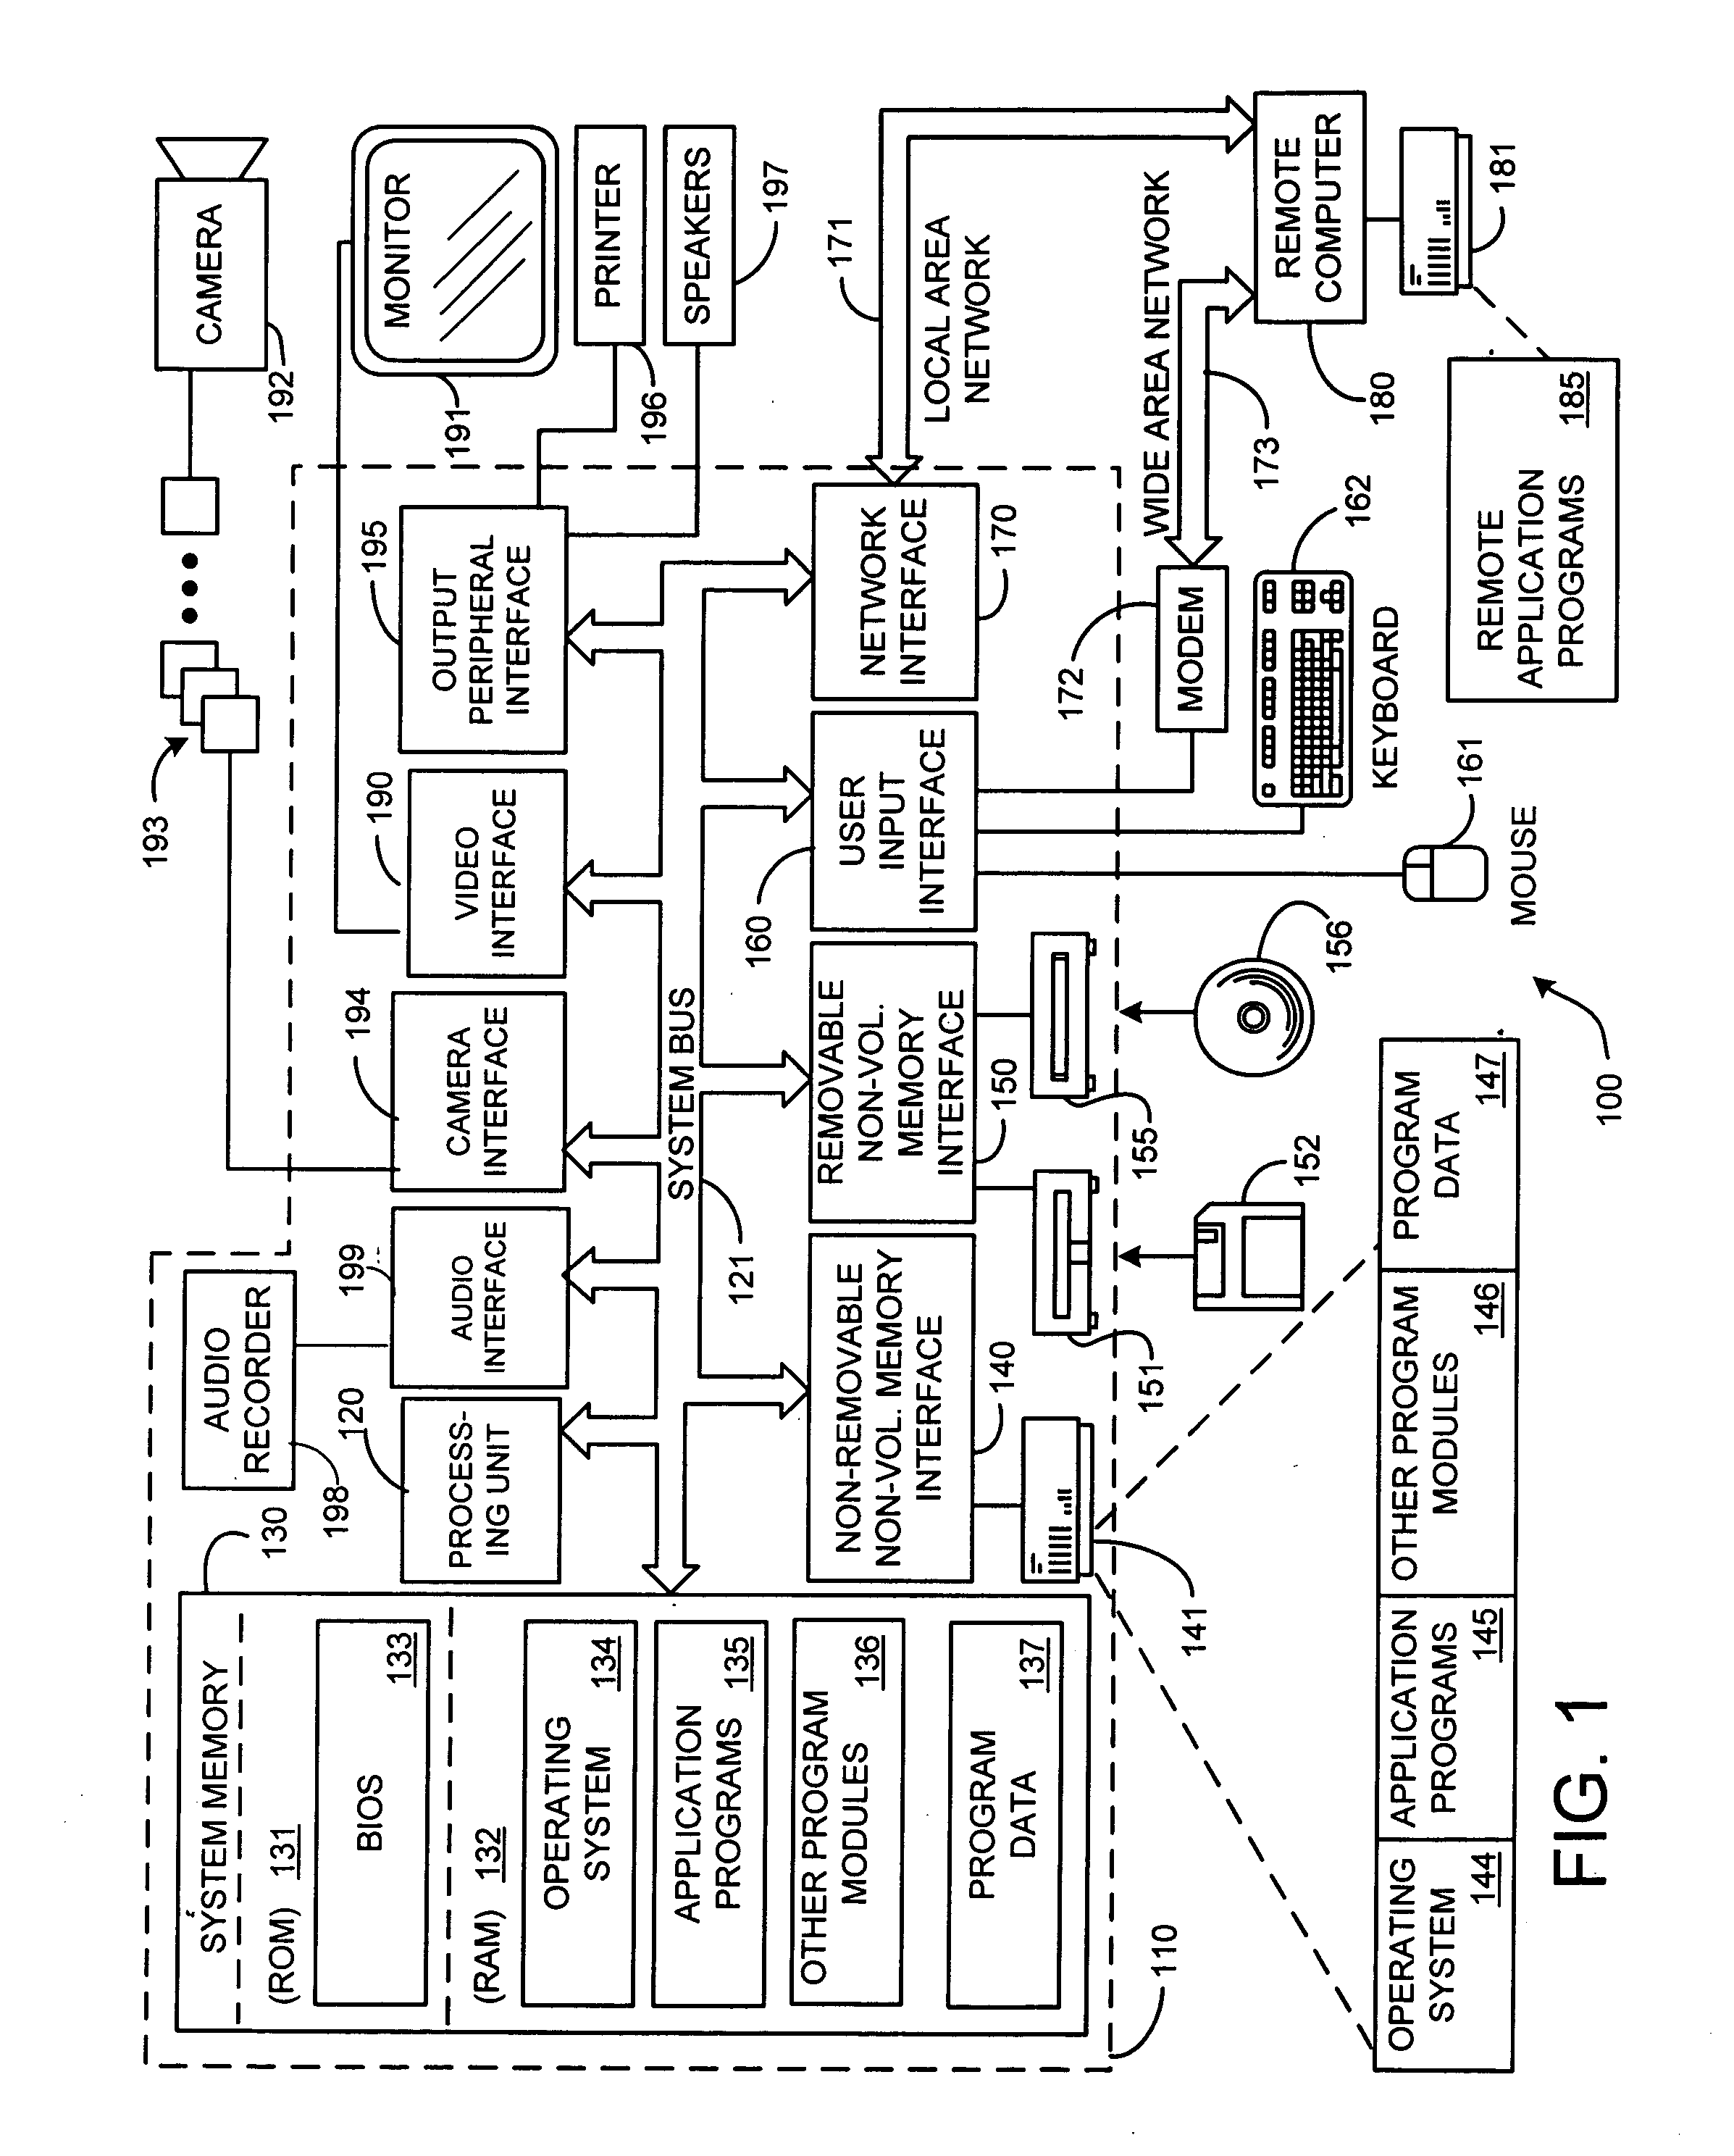 System and method for calibrating multiple cameras without employing a pattern by inter-image homography